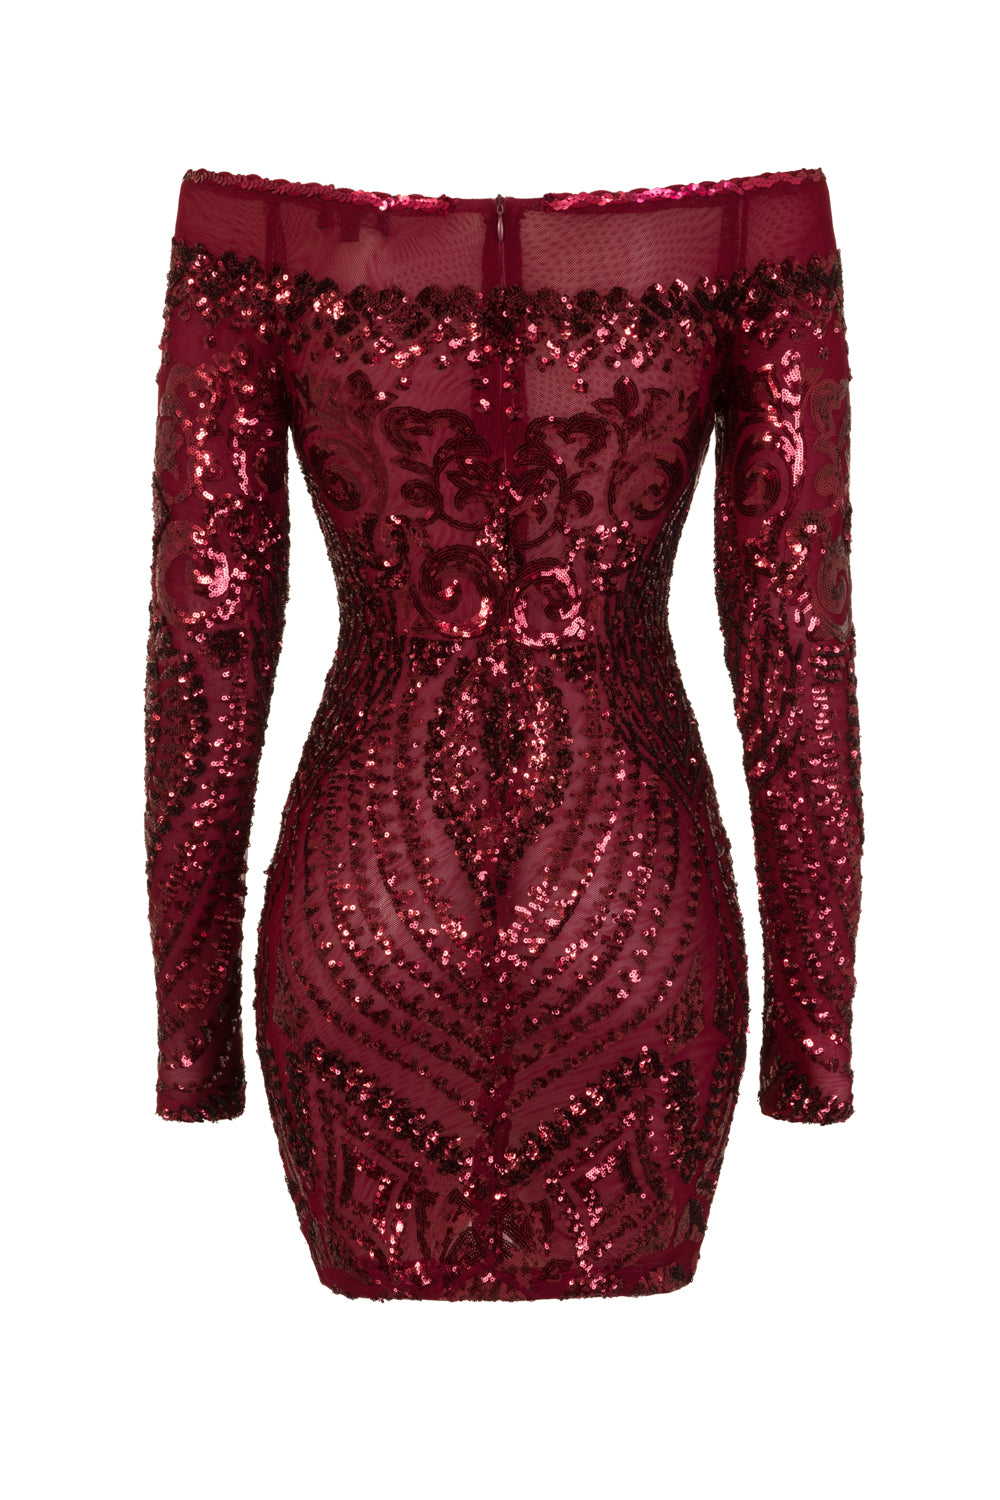 Iliana Berry Luxe Sequin Embellished Off The Shoulder Dress